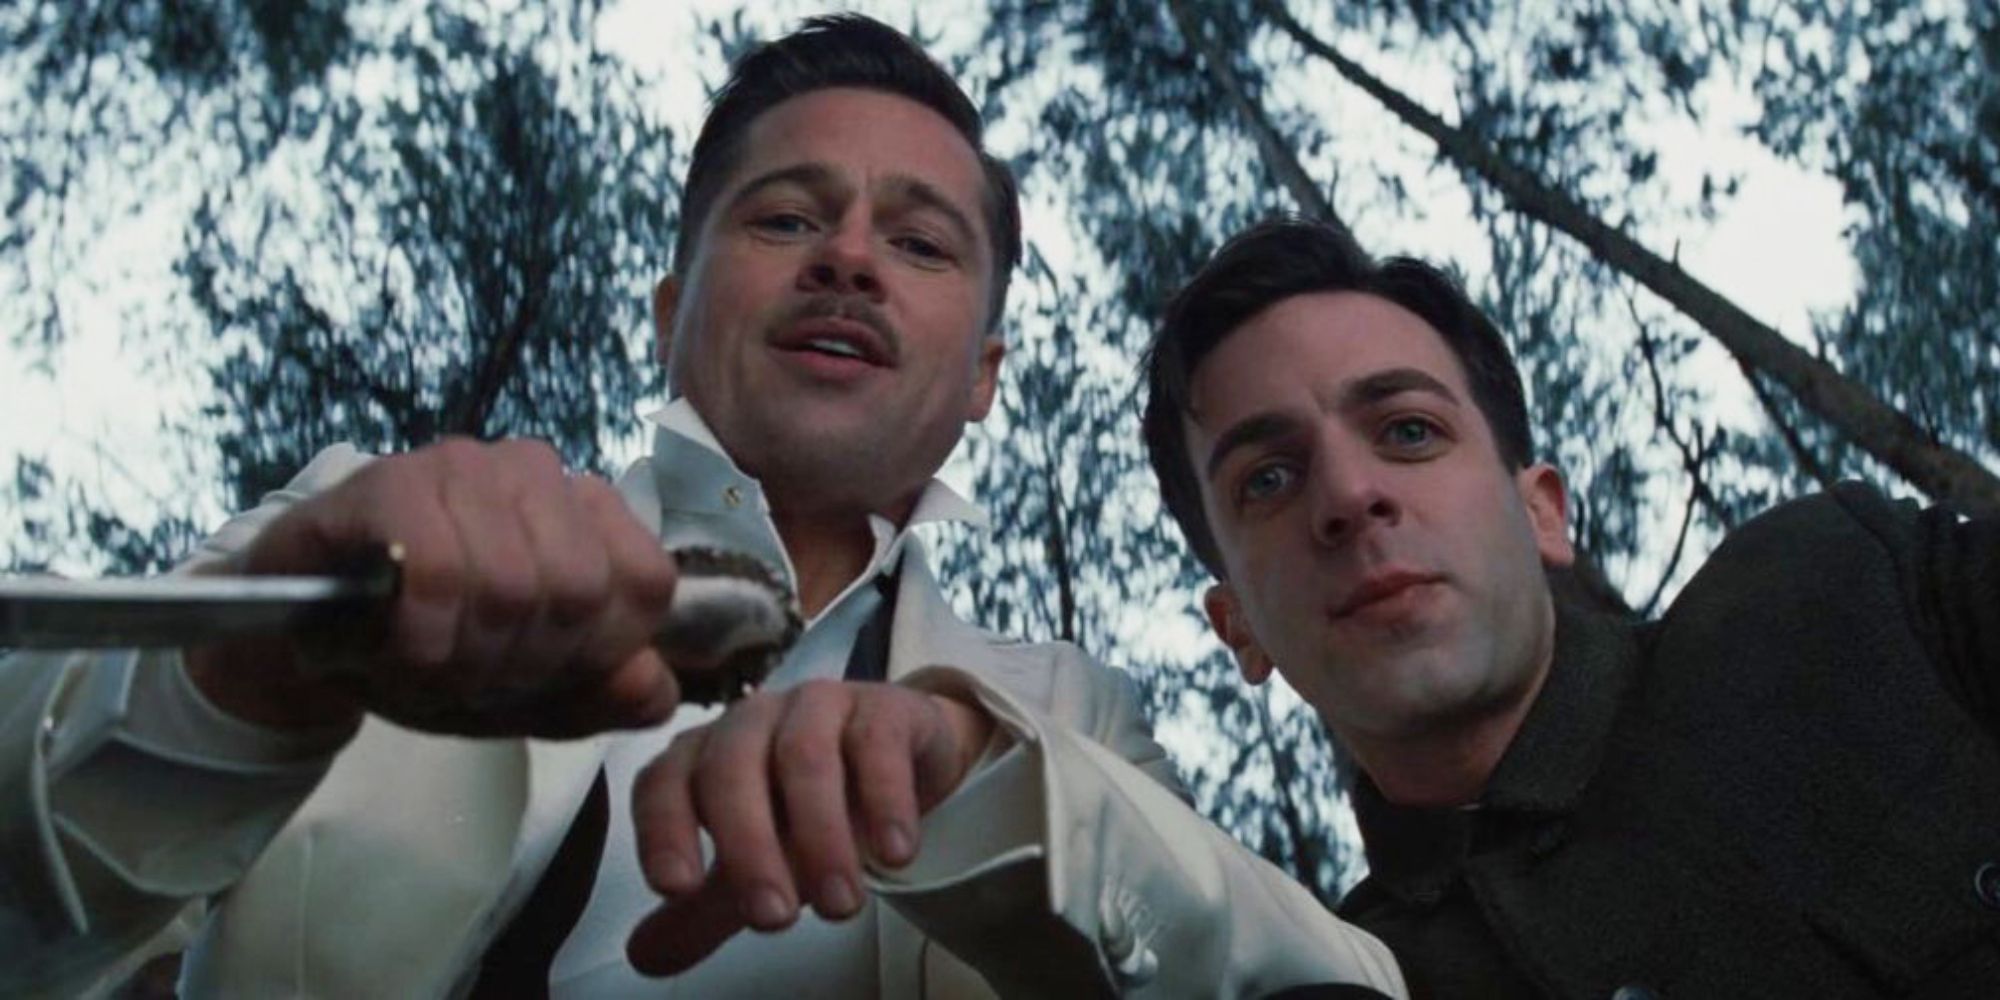 Aldo and Utivich looking down at something and smiling in Inglourious Basterds